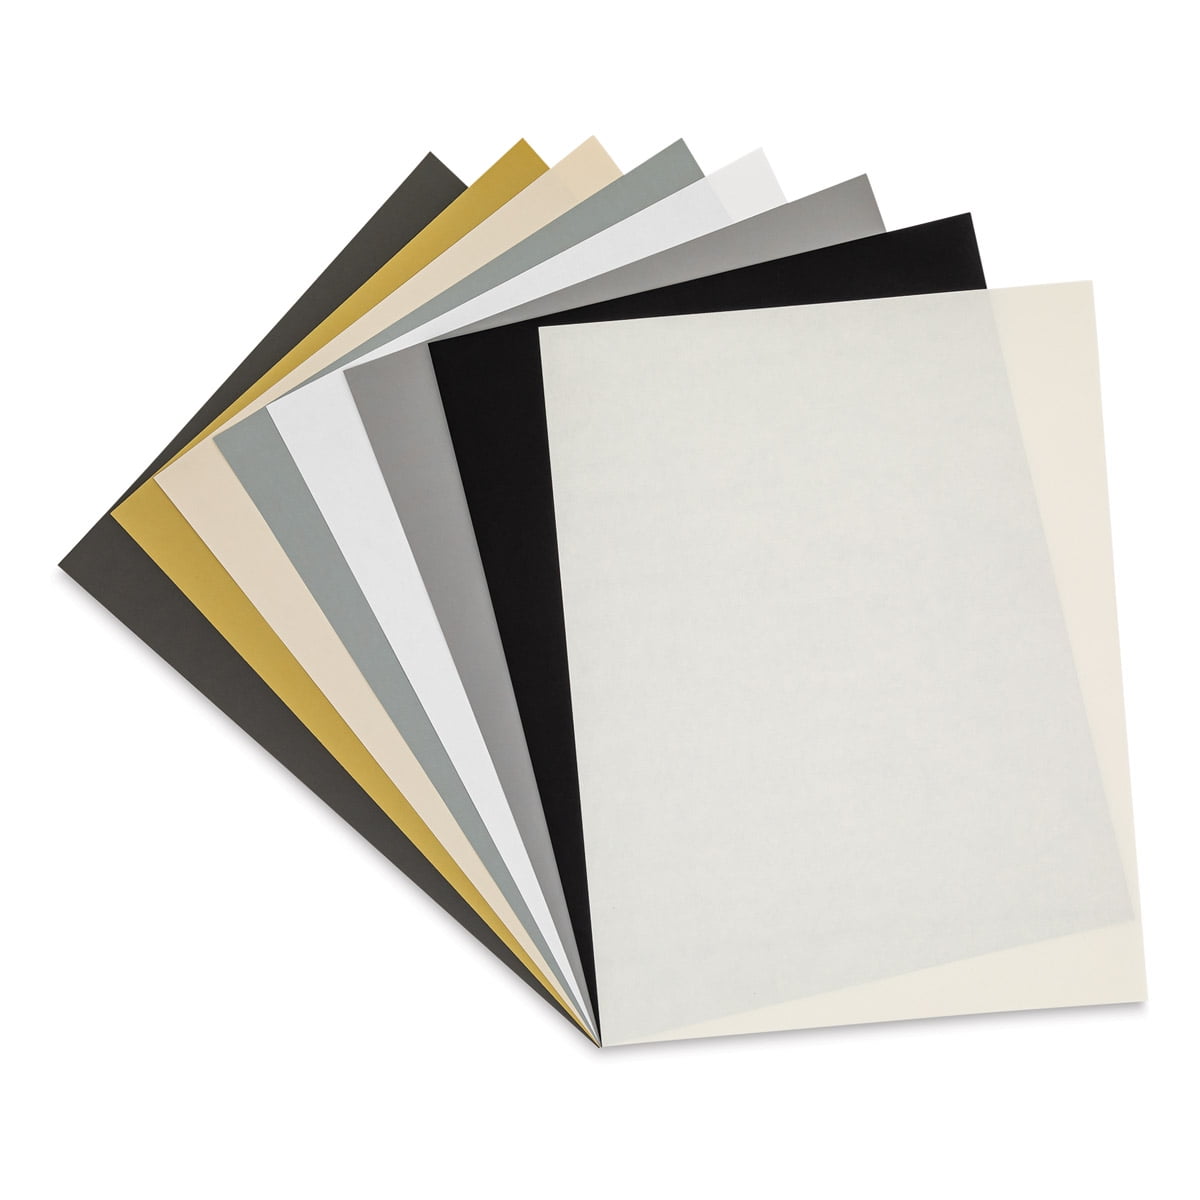 Blick Studio Newsprint Pad - 12 inch x 18 inch, 100 Sheets, Other